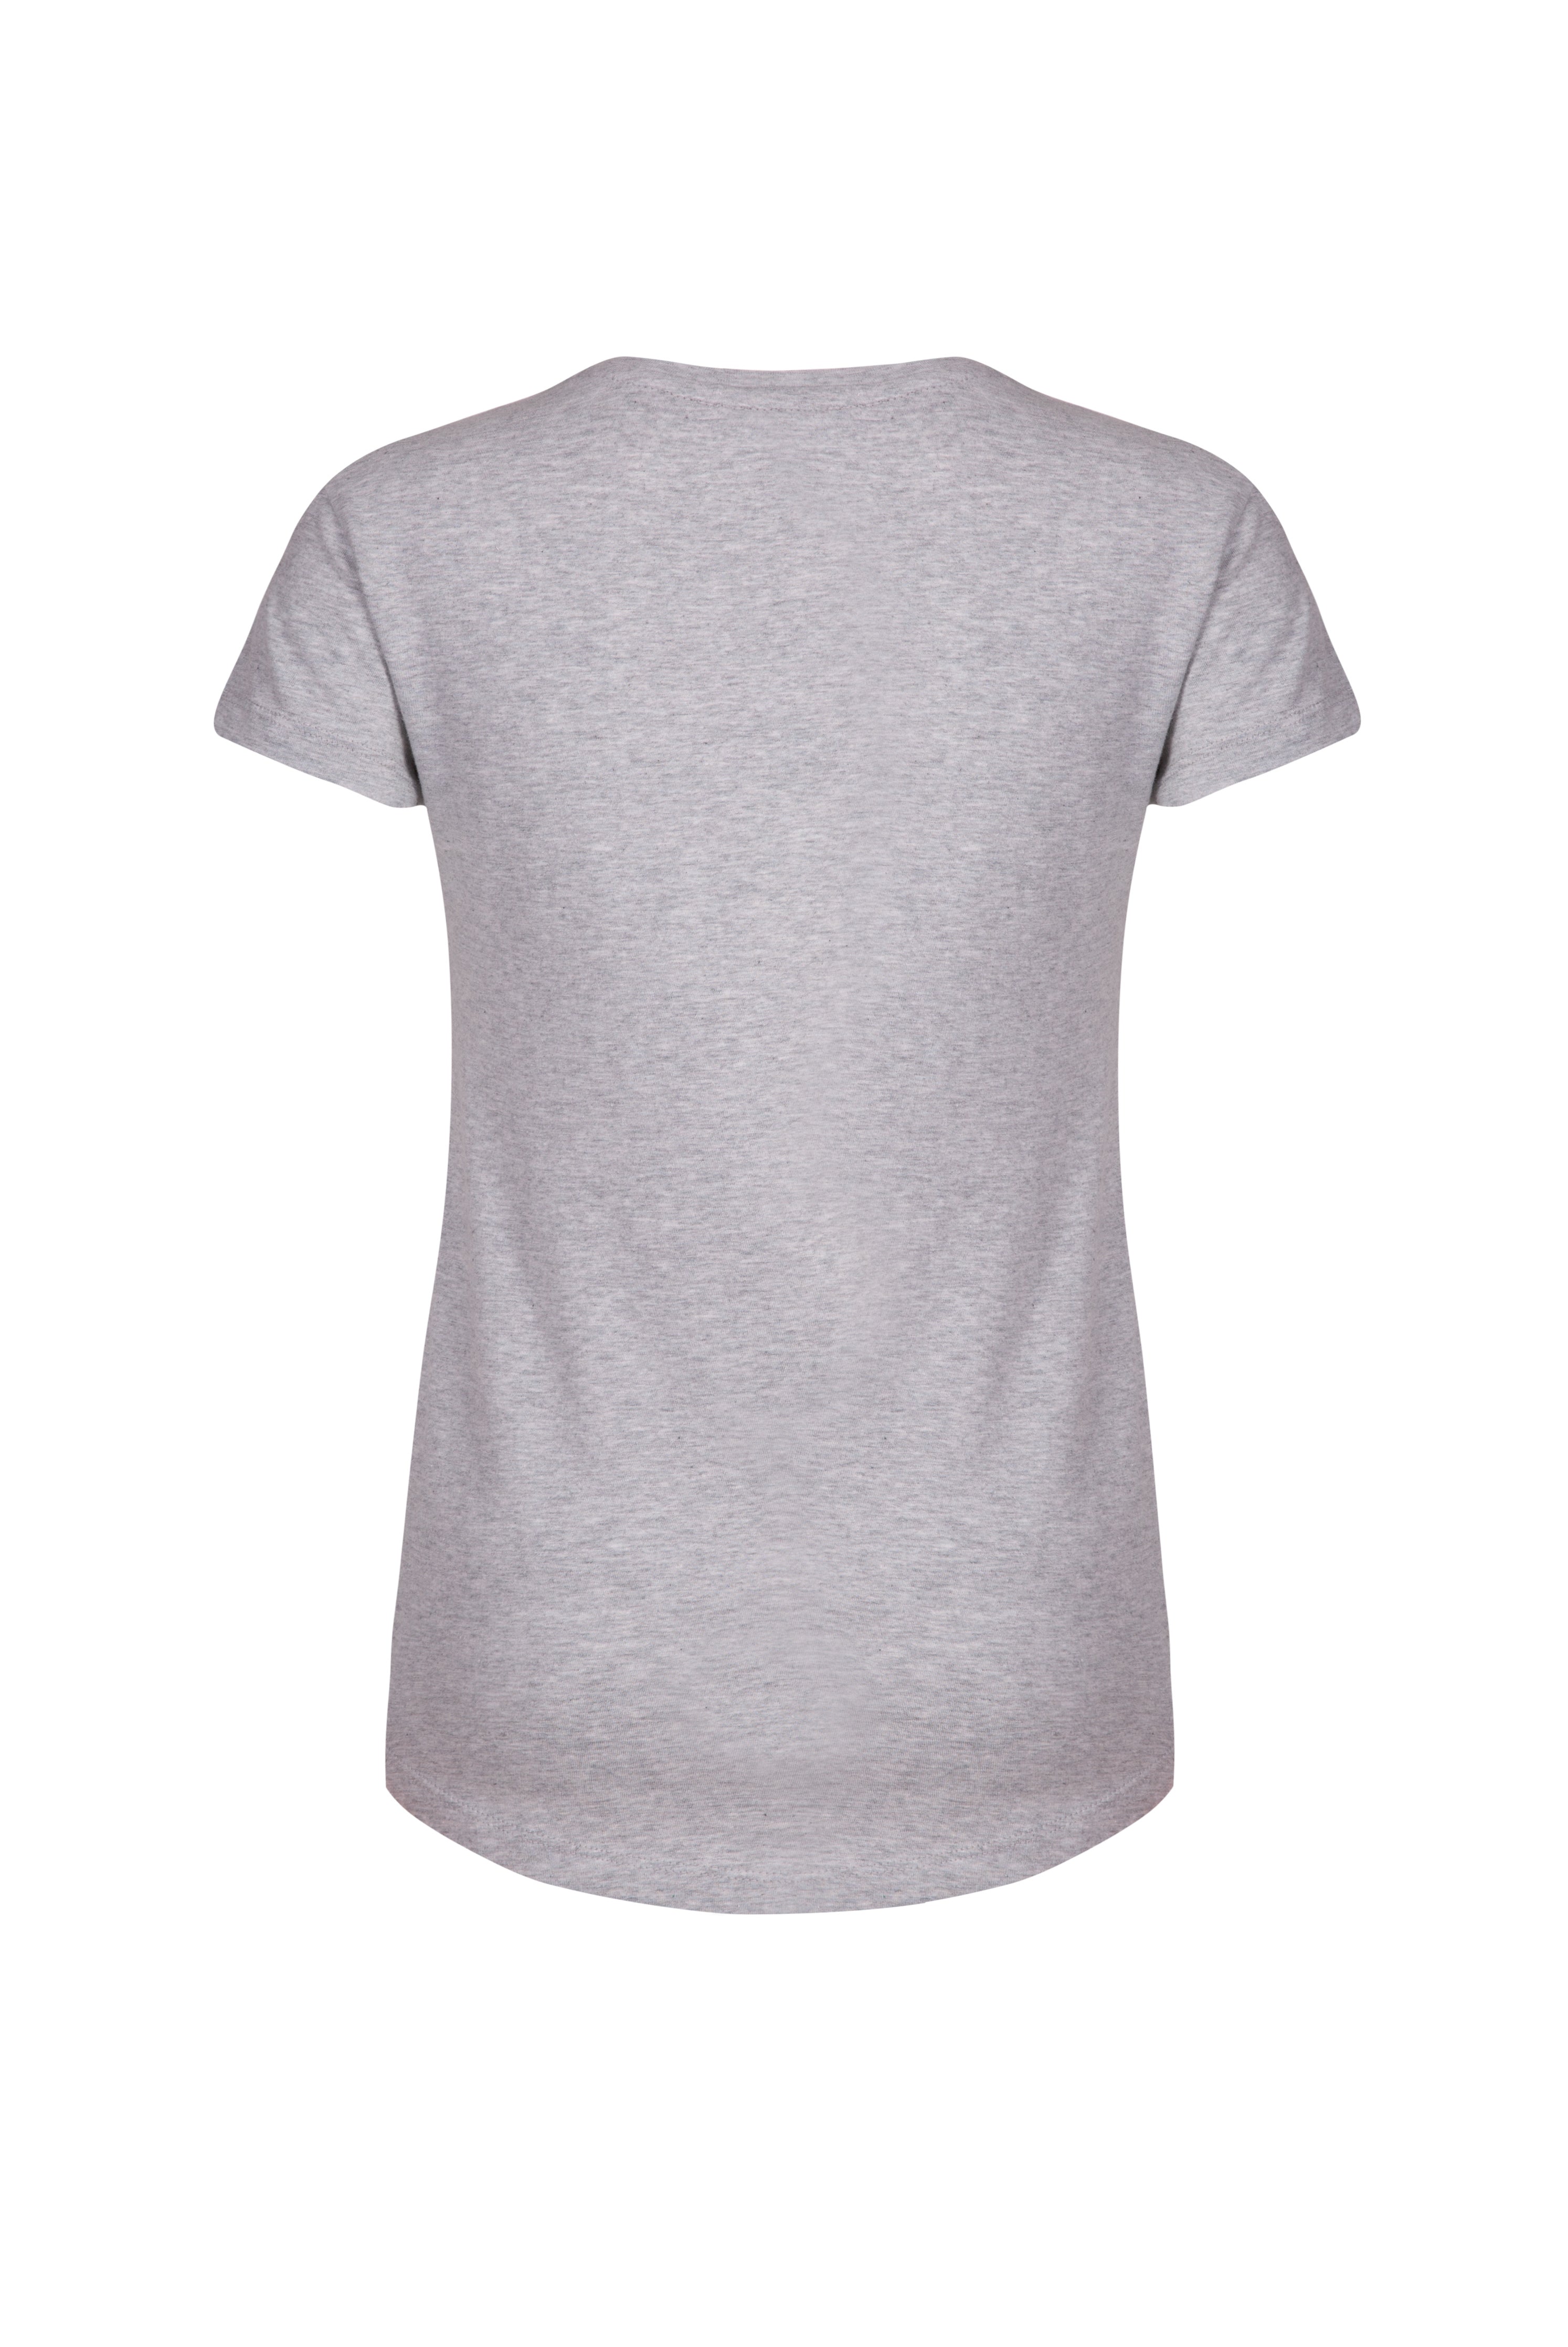 Back of grey fitted organic cotton women's t-shirt